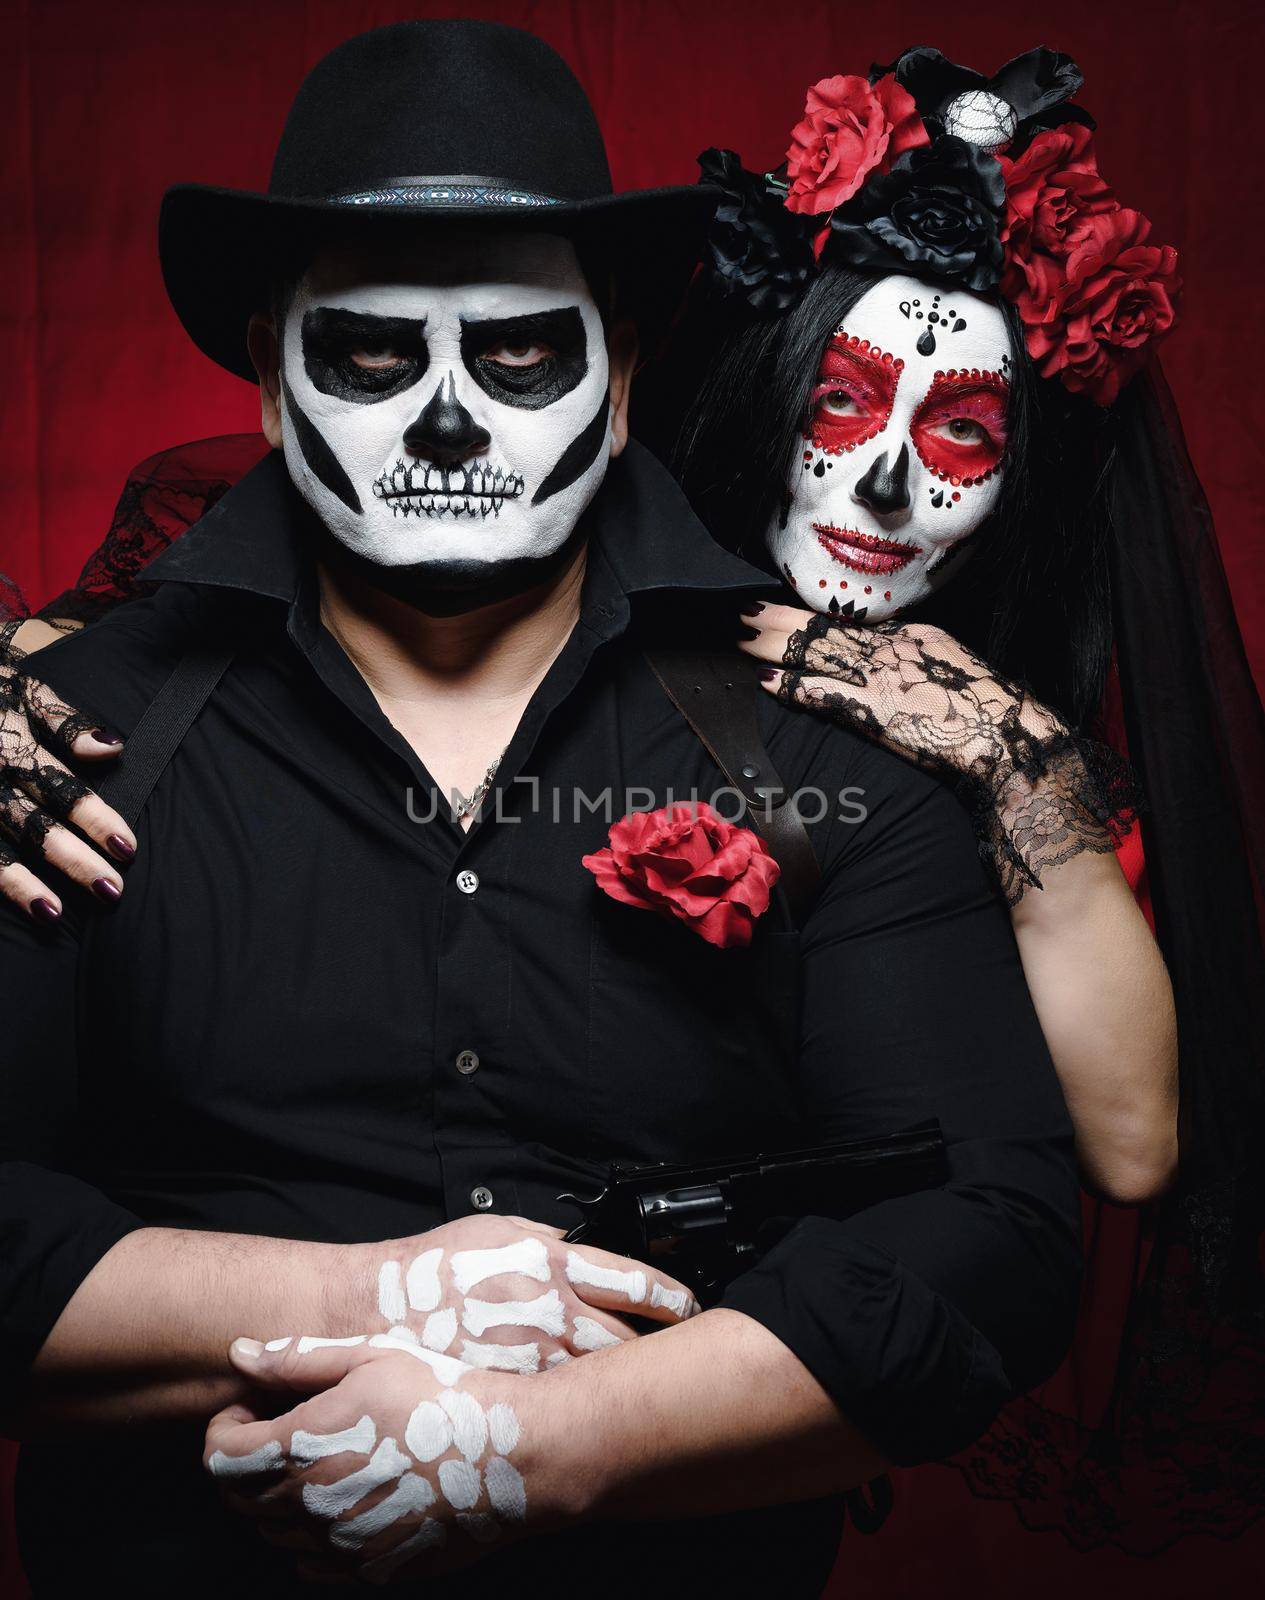 beautiful woman with a sugar skull makeup with a wreath of flowers on her head and a skeleton man in a black hat. Couple on dark red background by ndanko